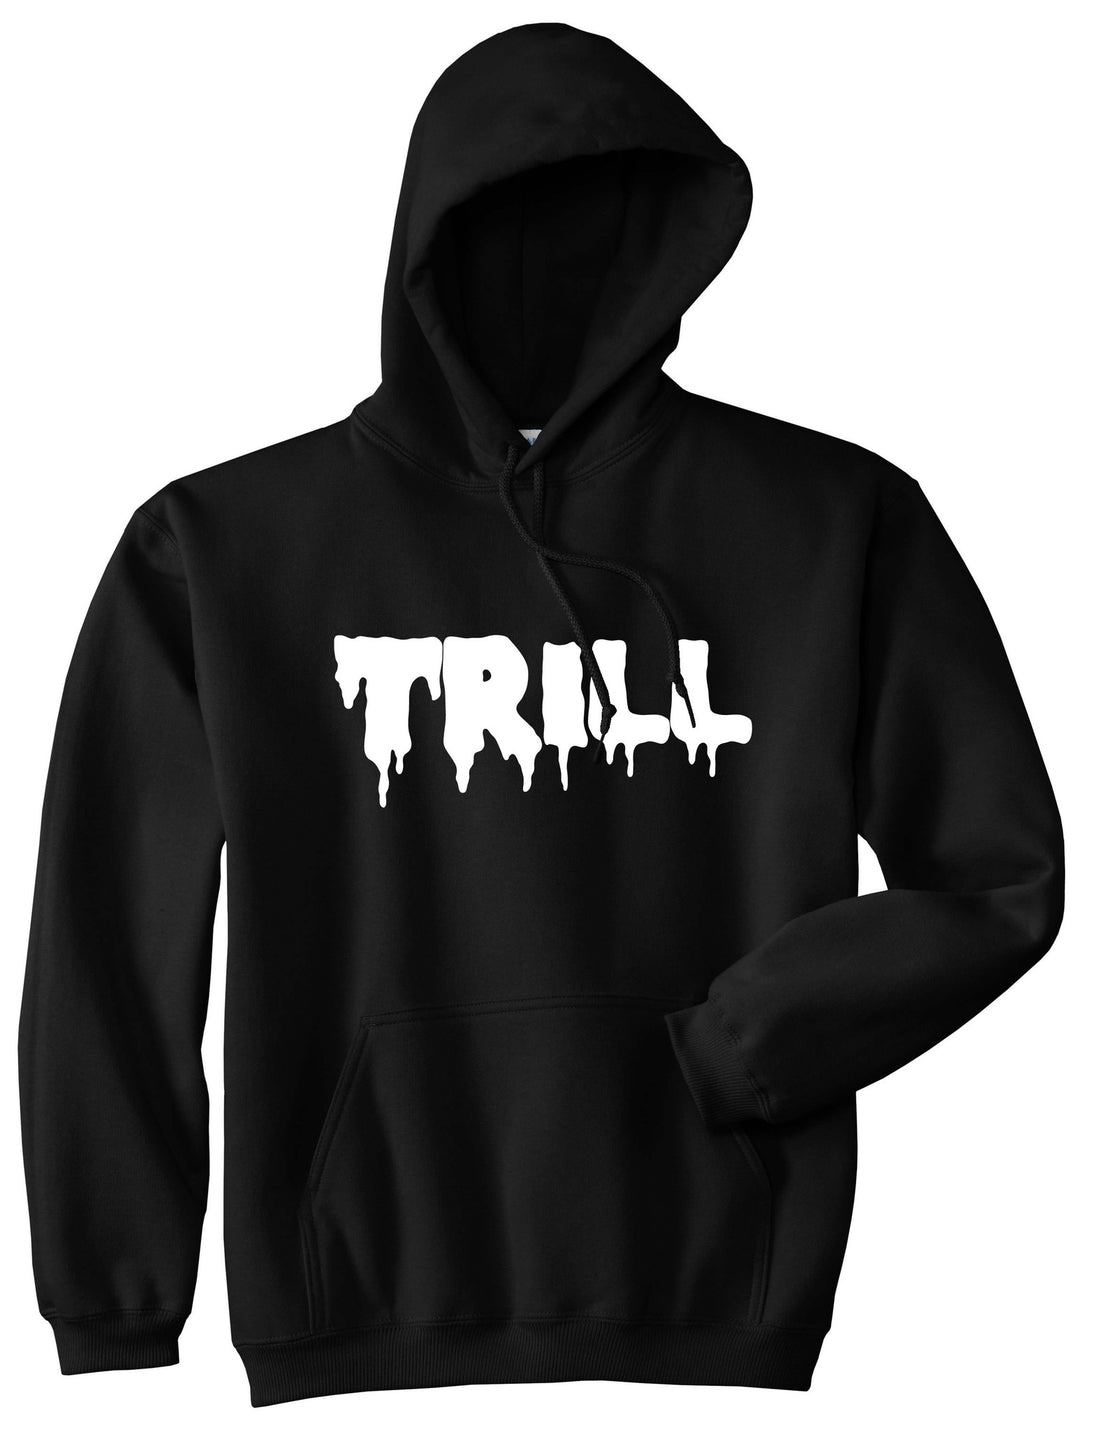 Trill Blood New York Bx Been Style Fashion Pullover Hoodie Hoody In Black by Kings Of NY